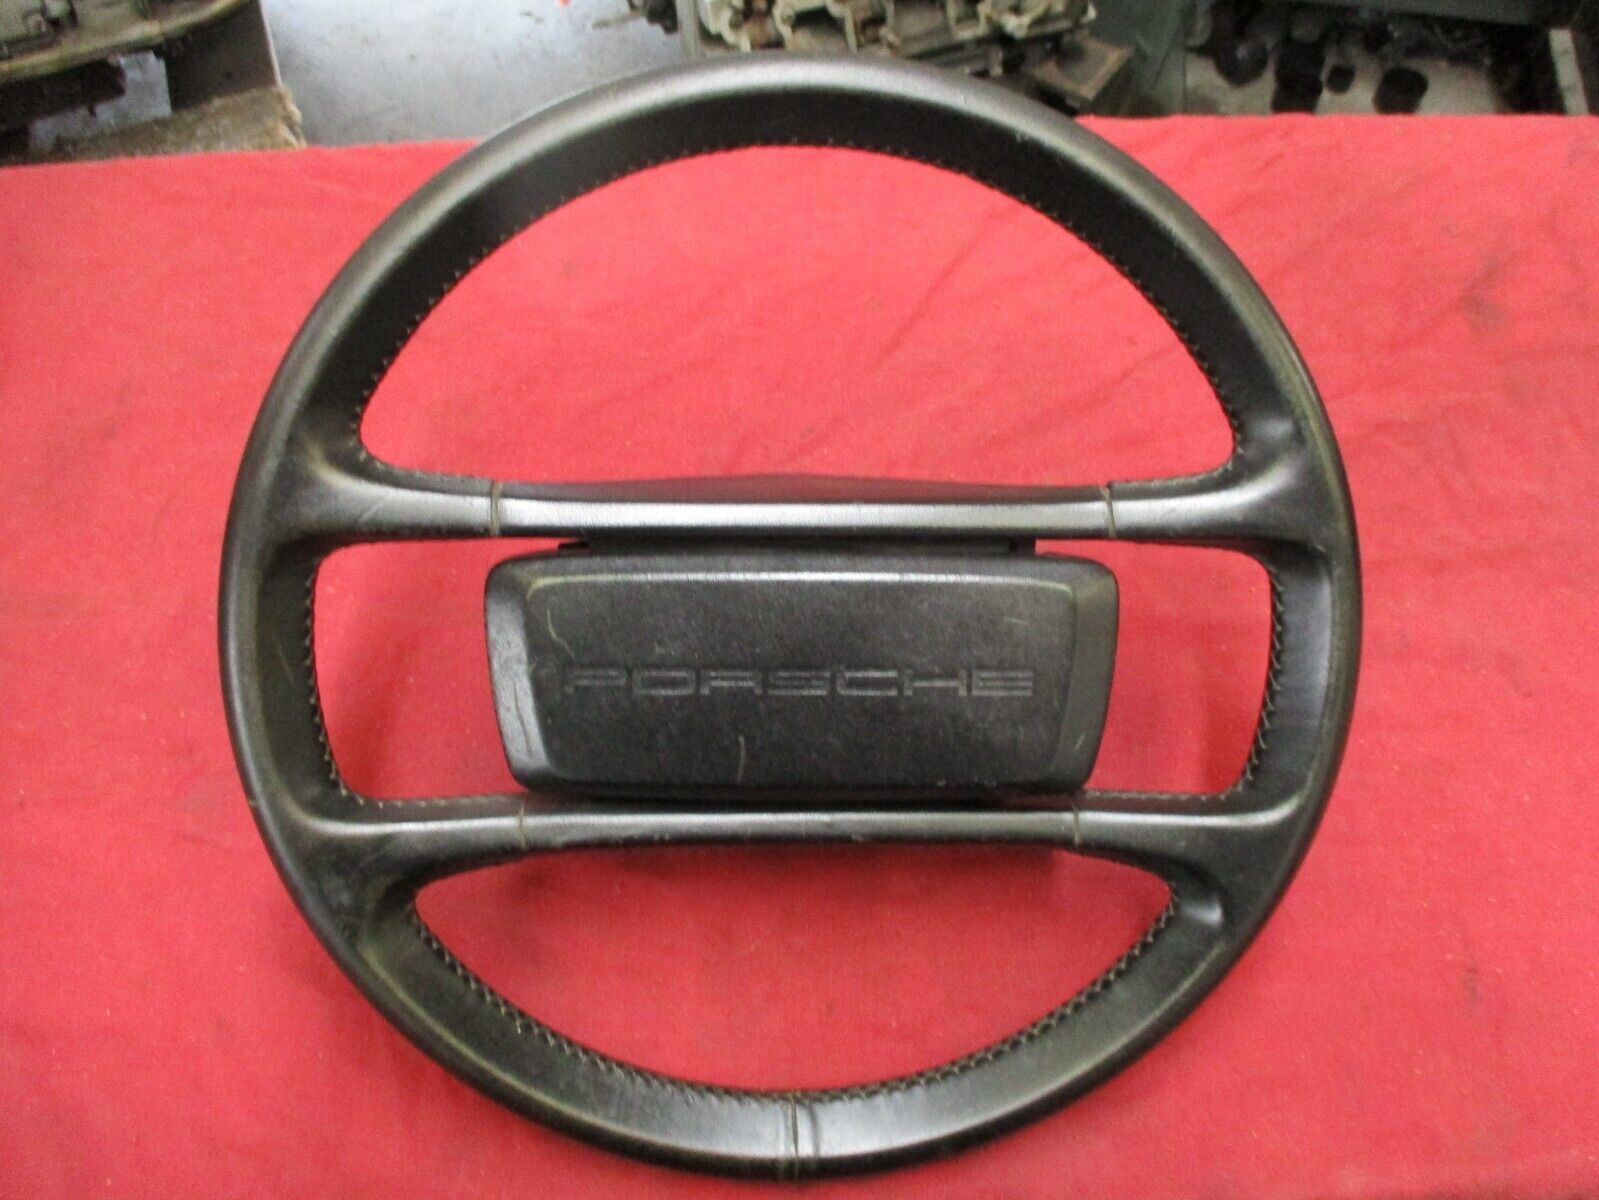 Porsche 944 Steering Wheel Original Leather Wrapped USED 944-347-084-08 (05 PUR)